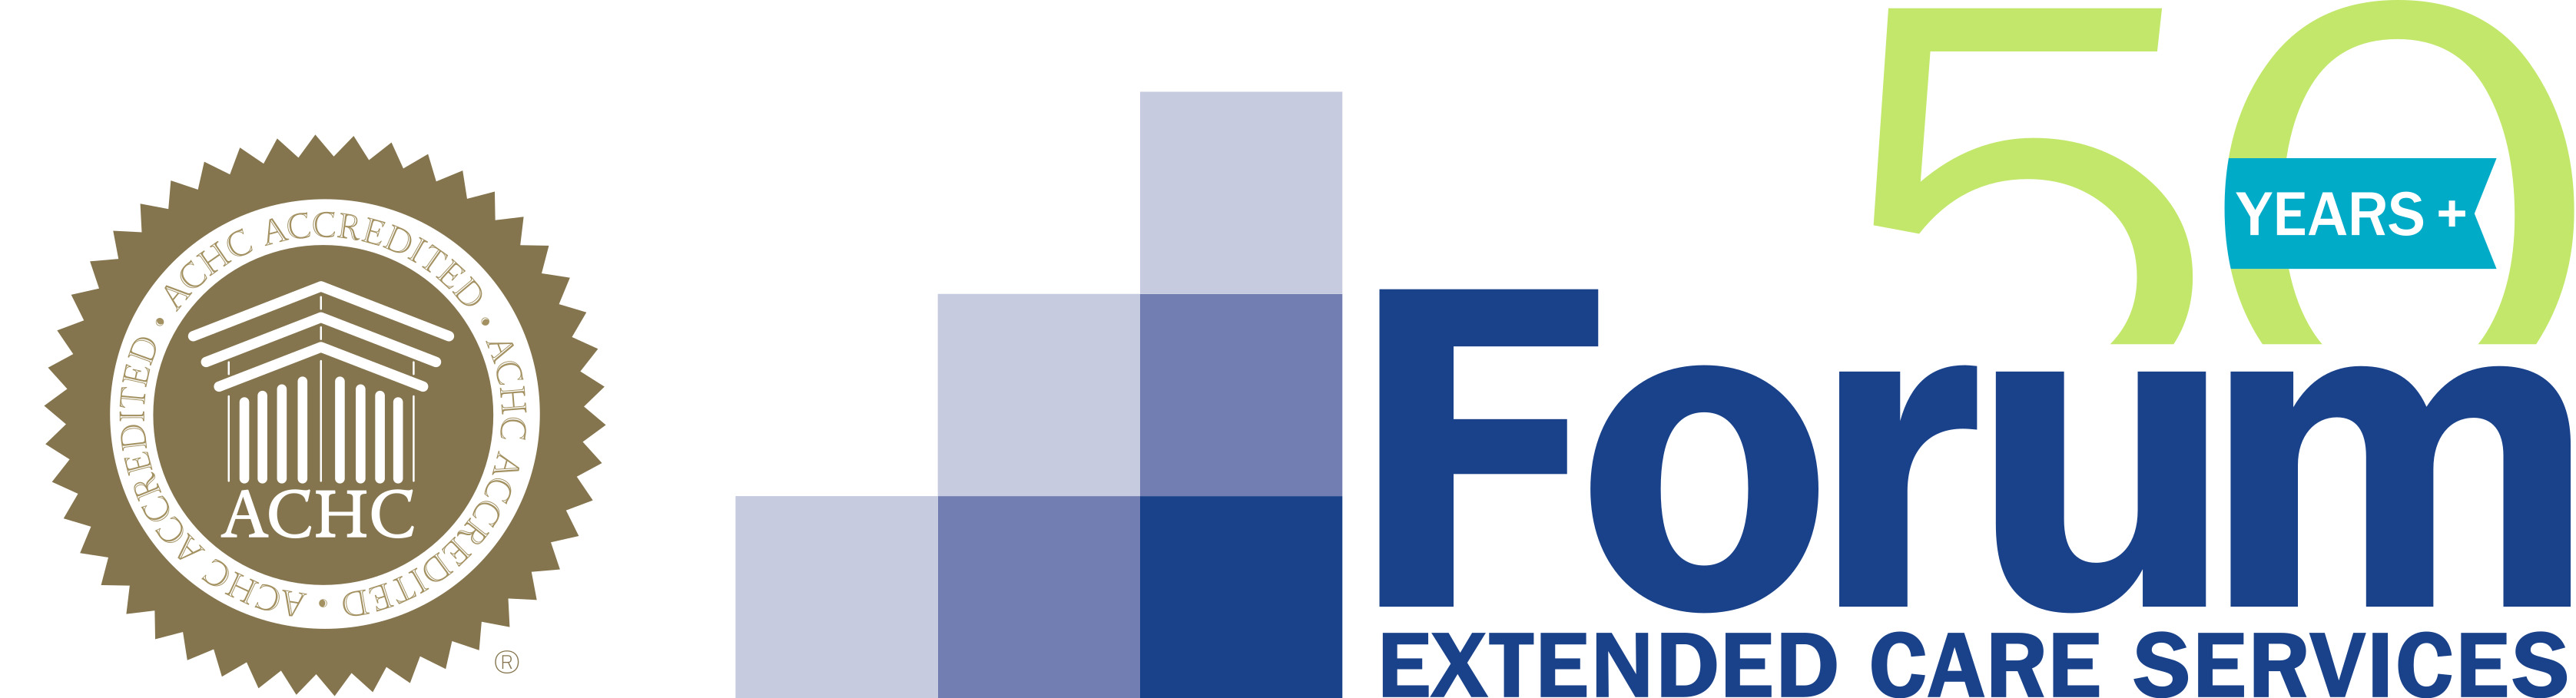 Forum Extended Care Services-1